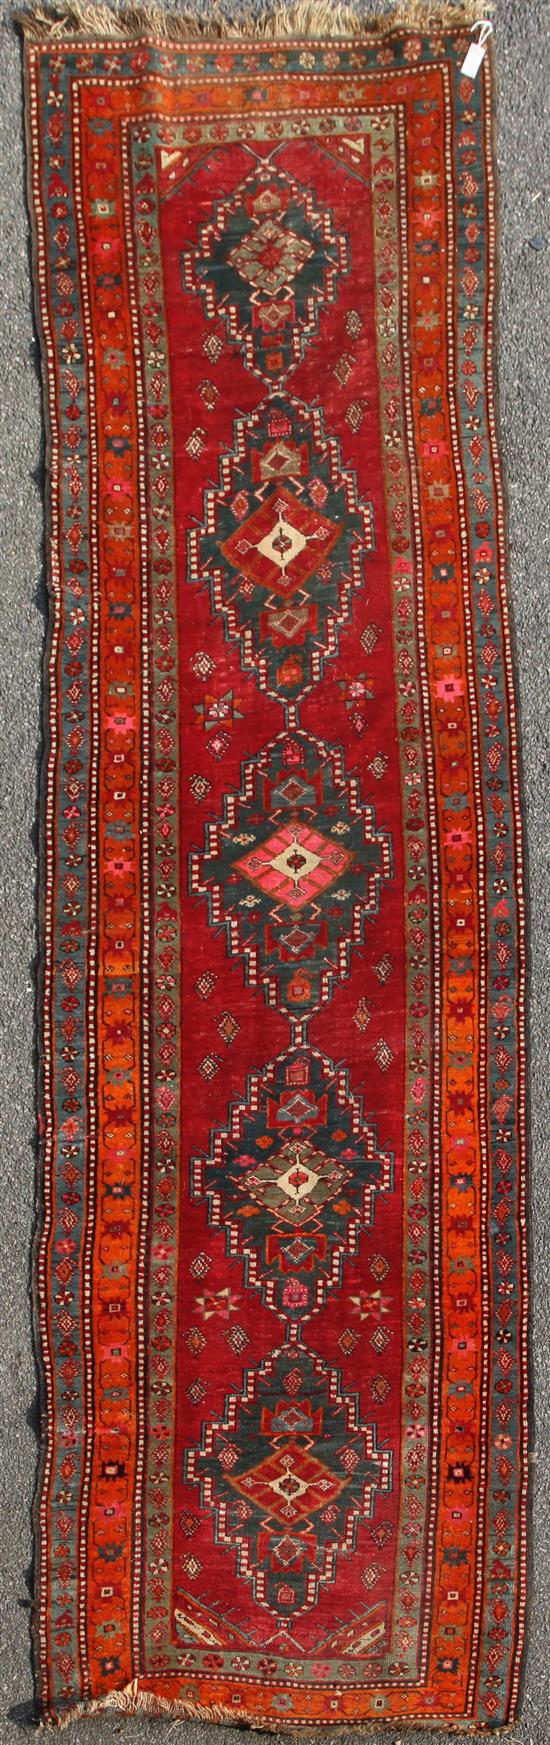 A Karabagh red ground runner c.1910, 12ft 5in by 3ft 11in.